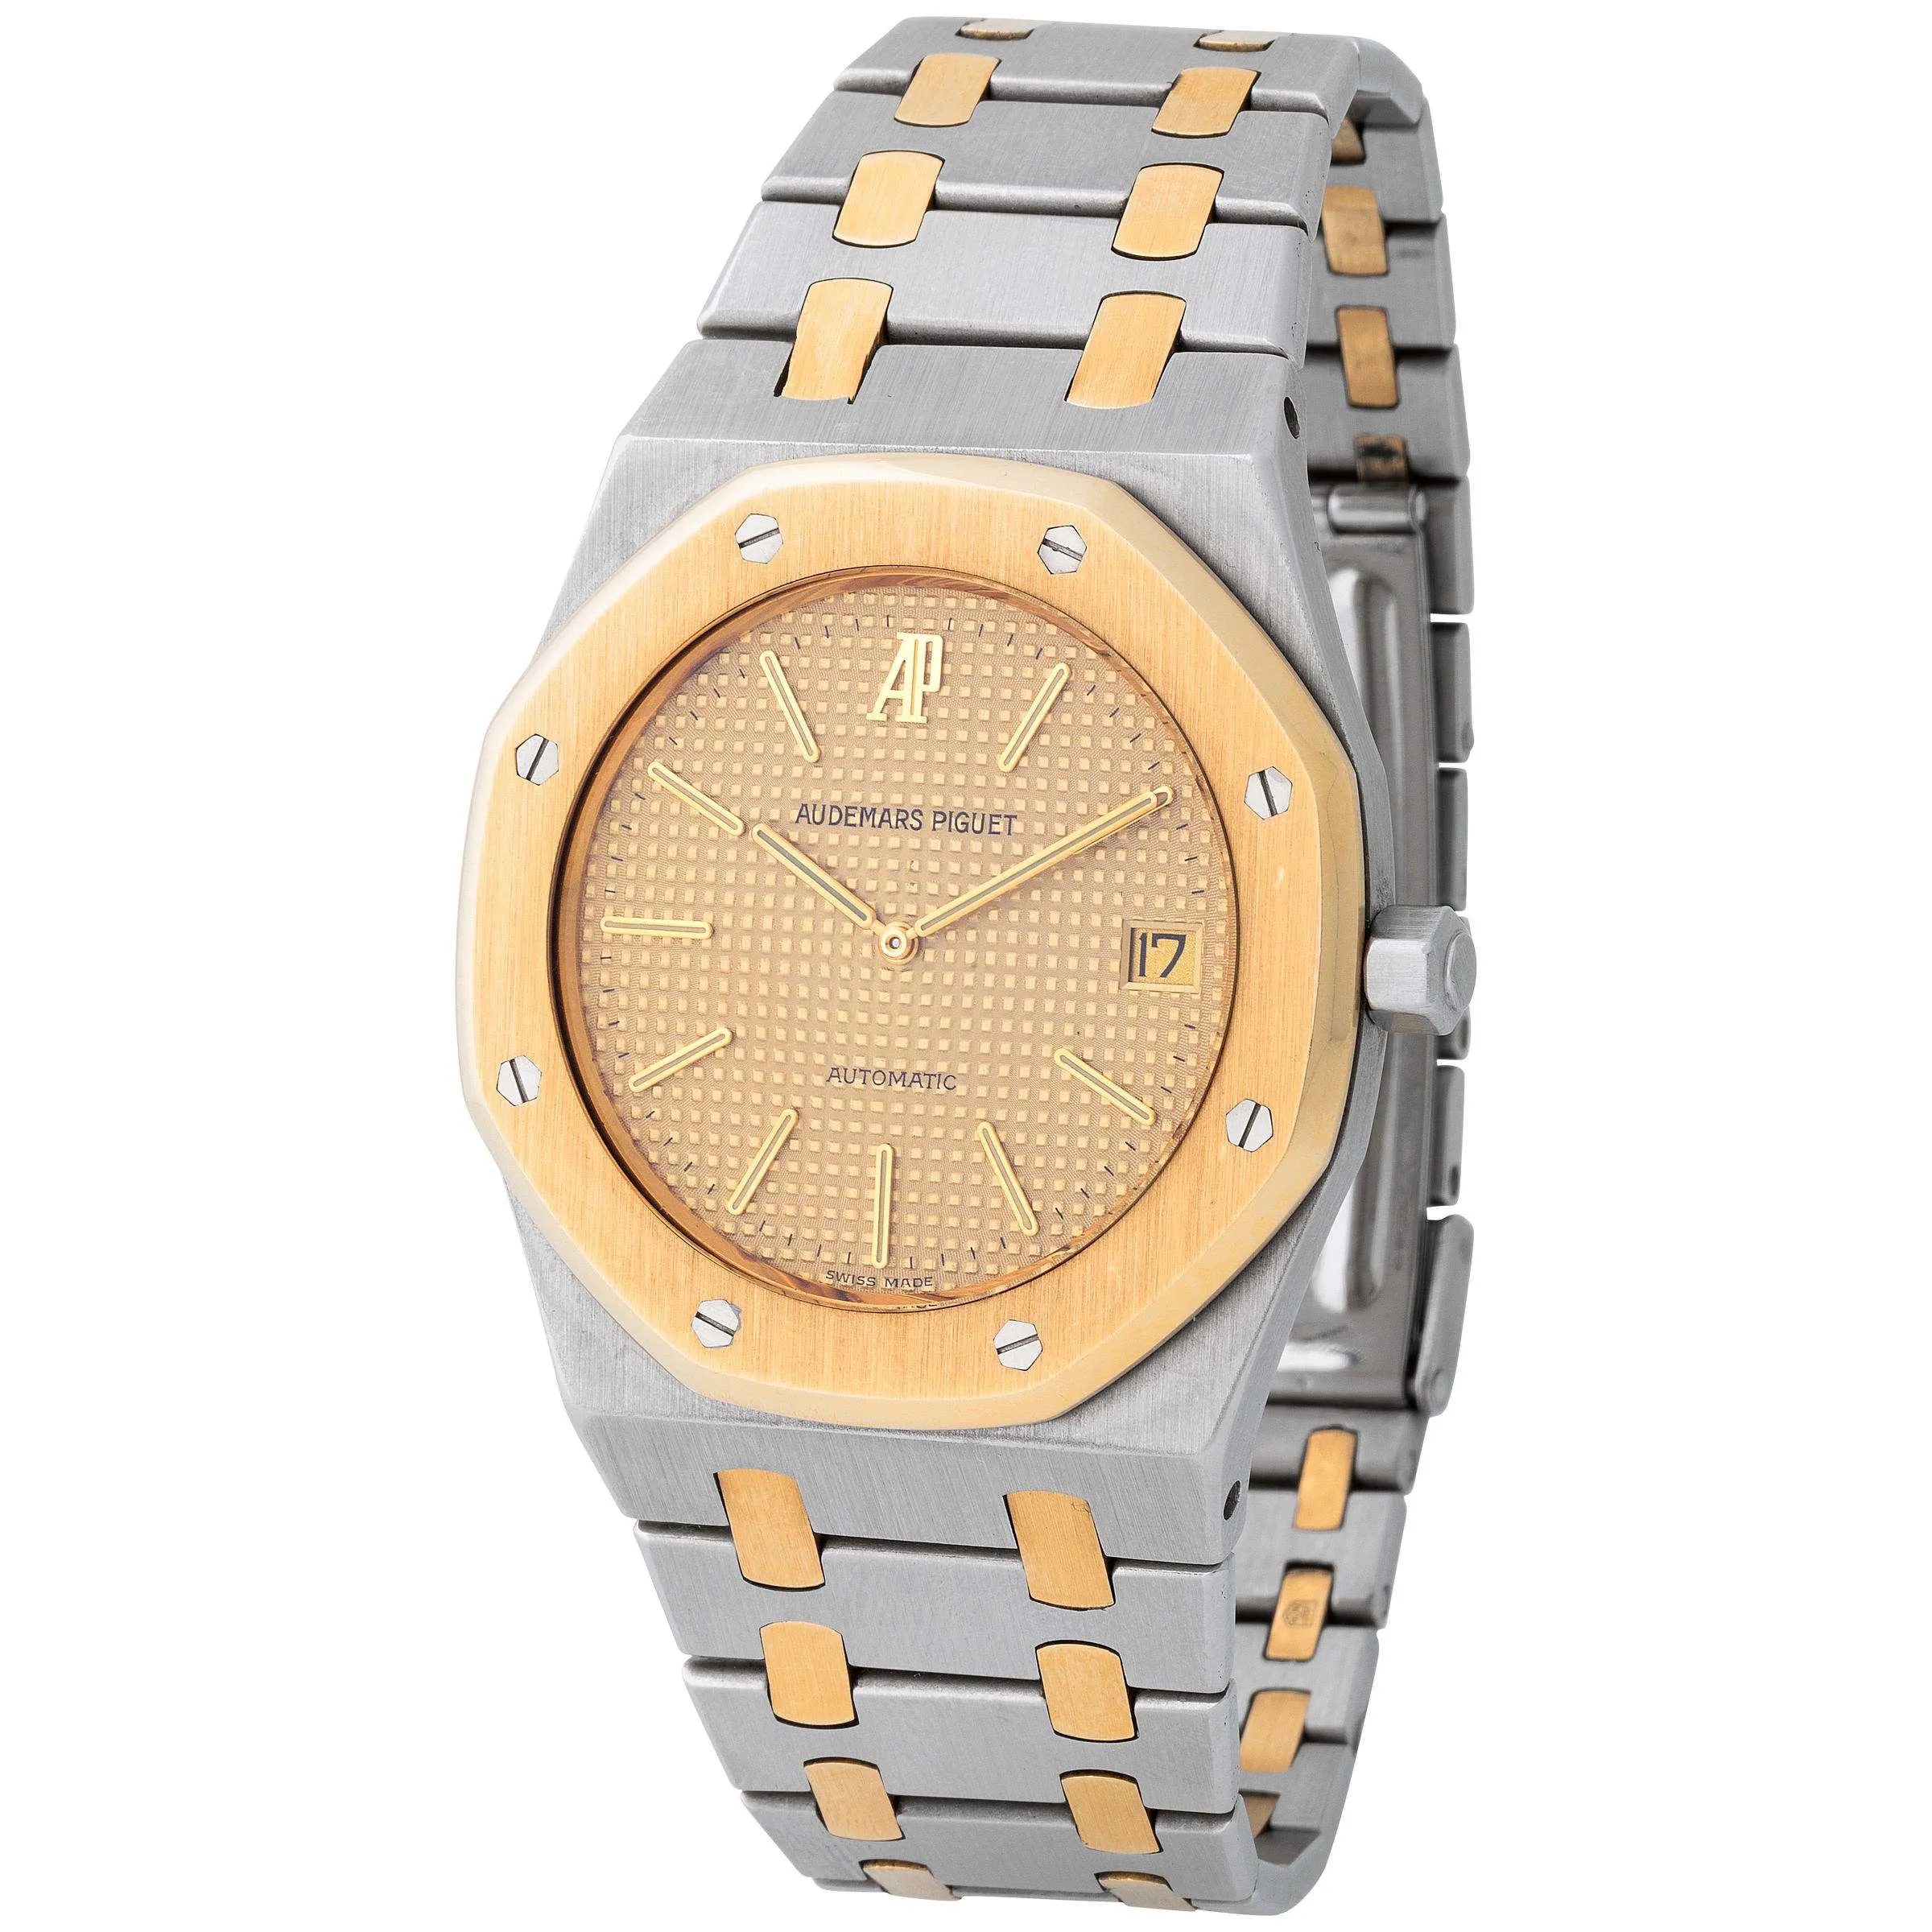 Audemars Piguet Royal Oak 5402SA 39mm Yellow gold and stainless steel Champagne